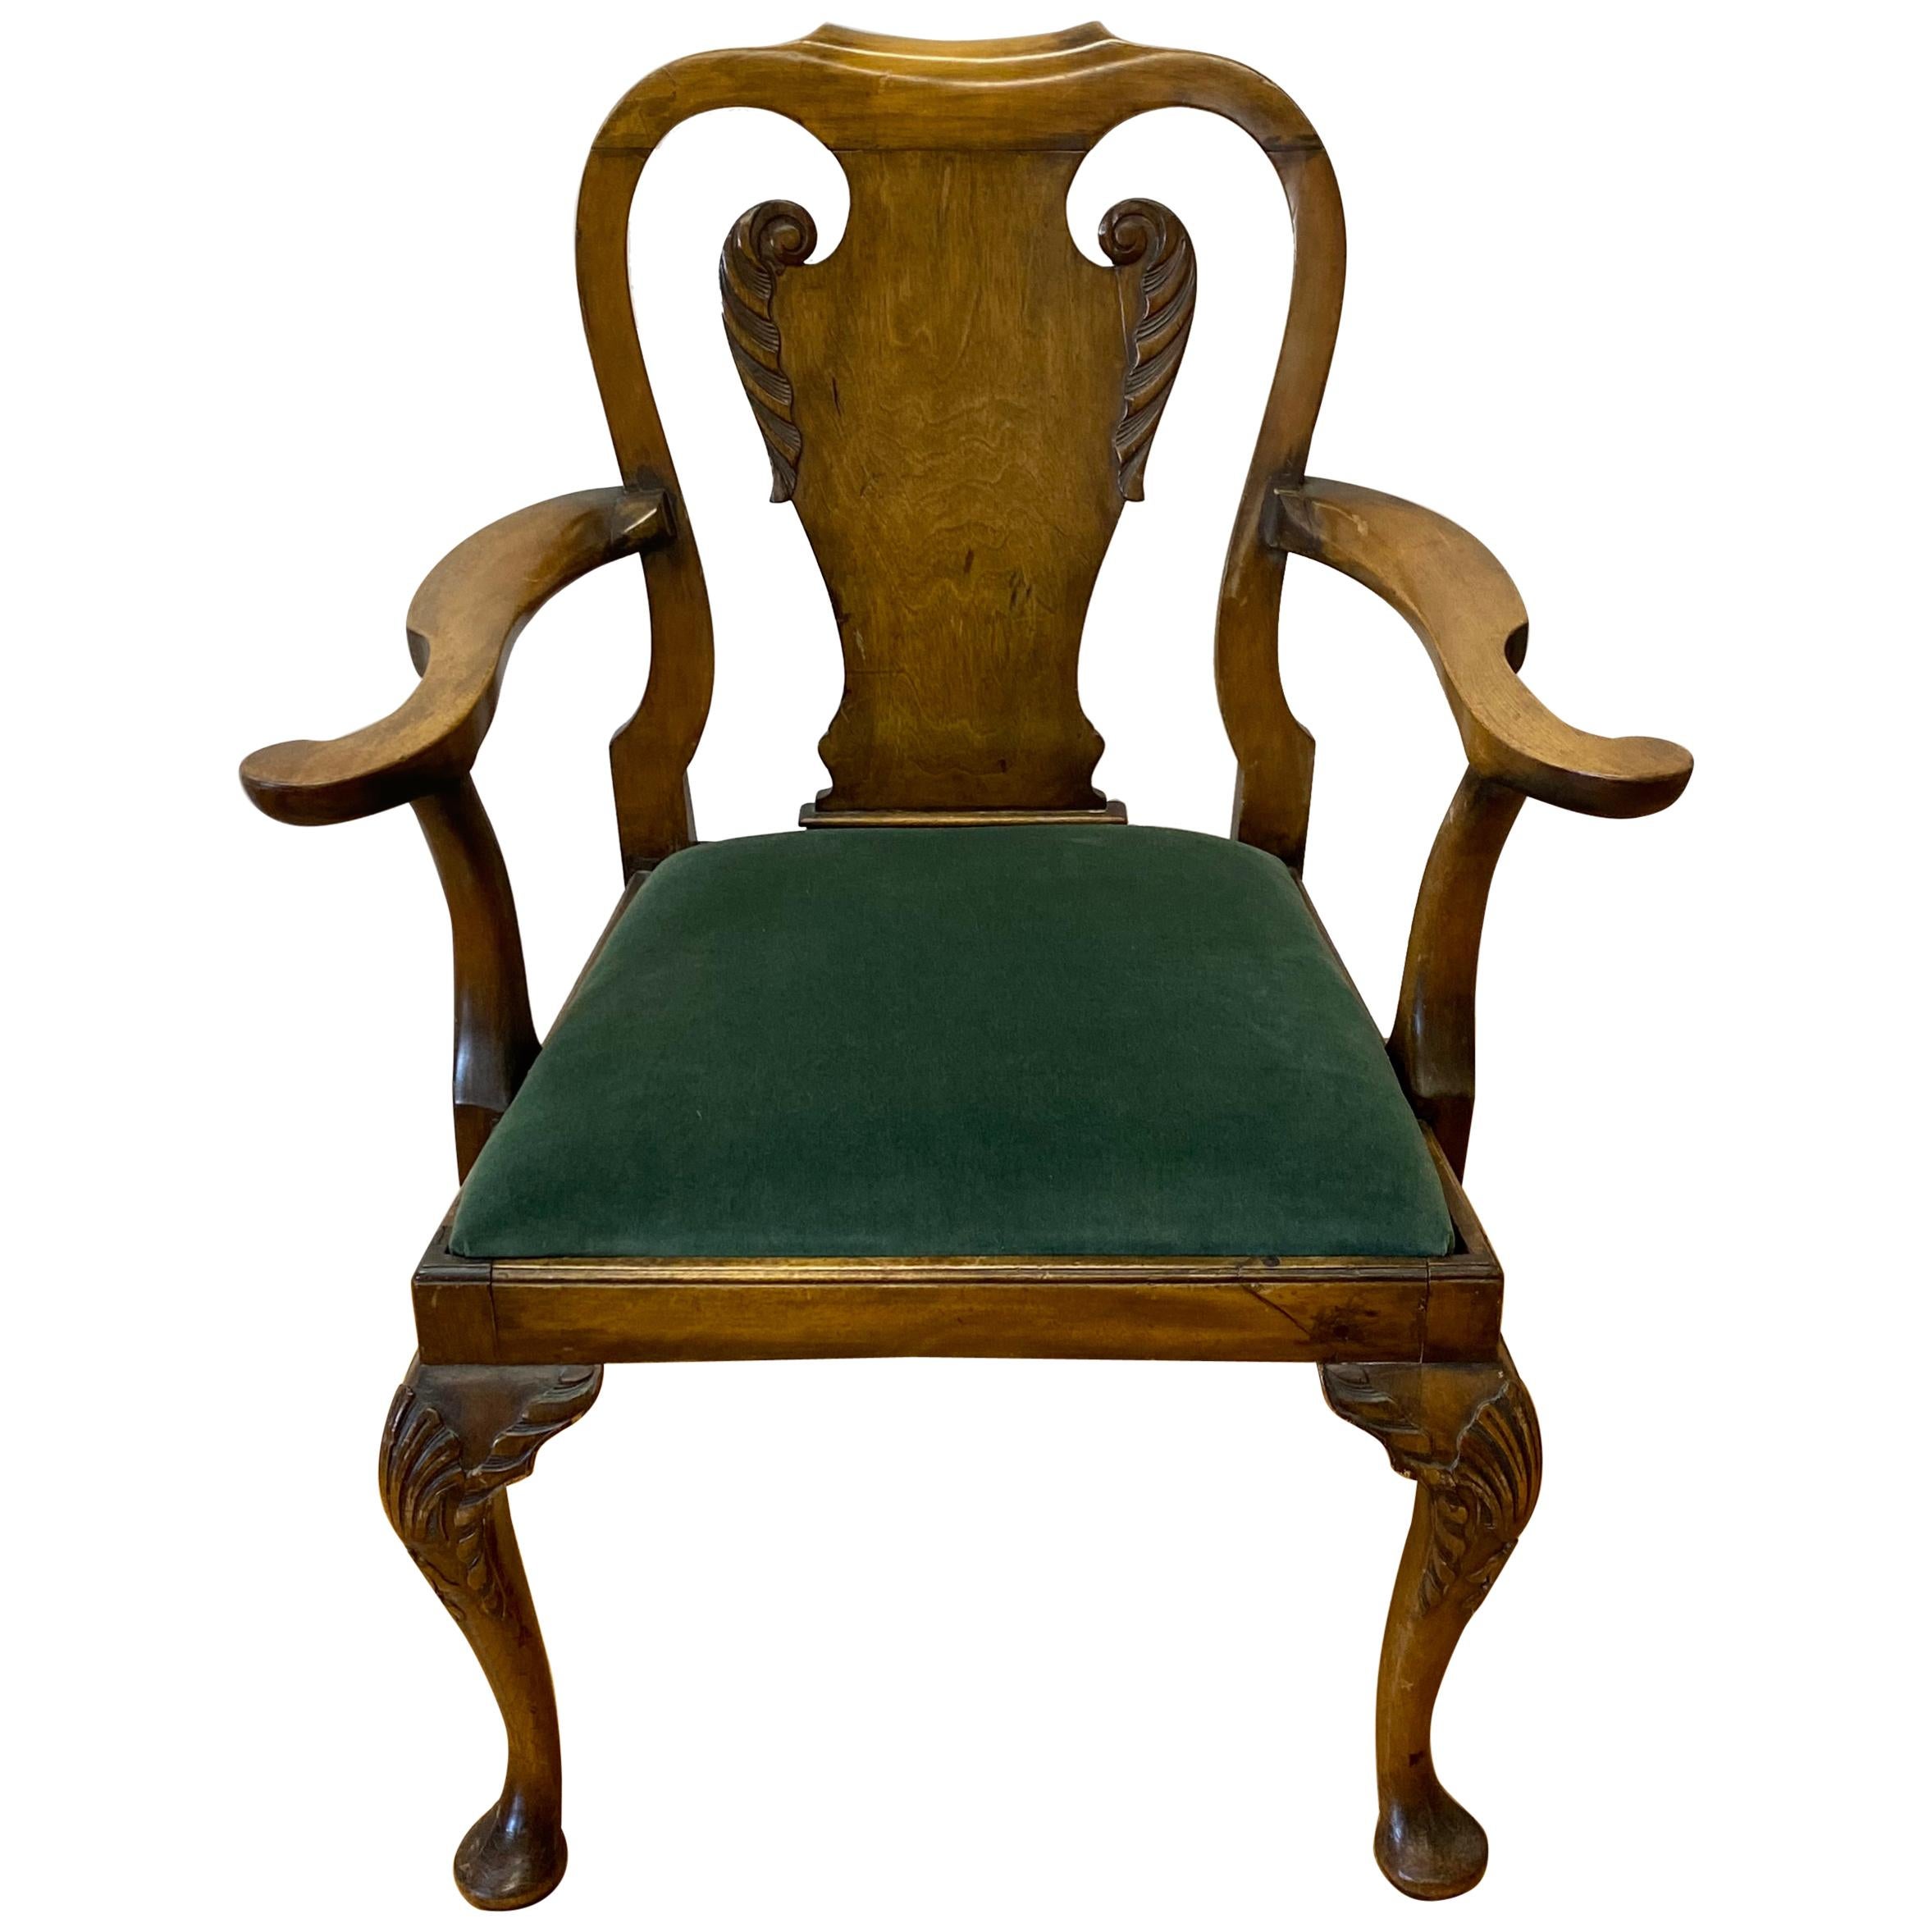 Queen Anne Style Carved Mahogany Armchair, circa 1830